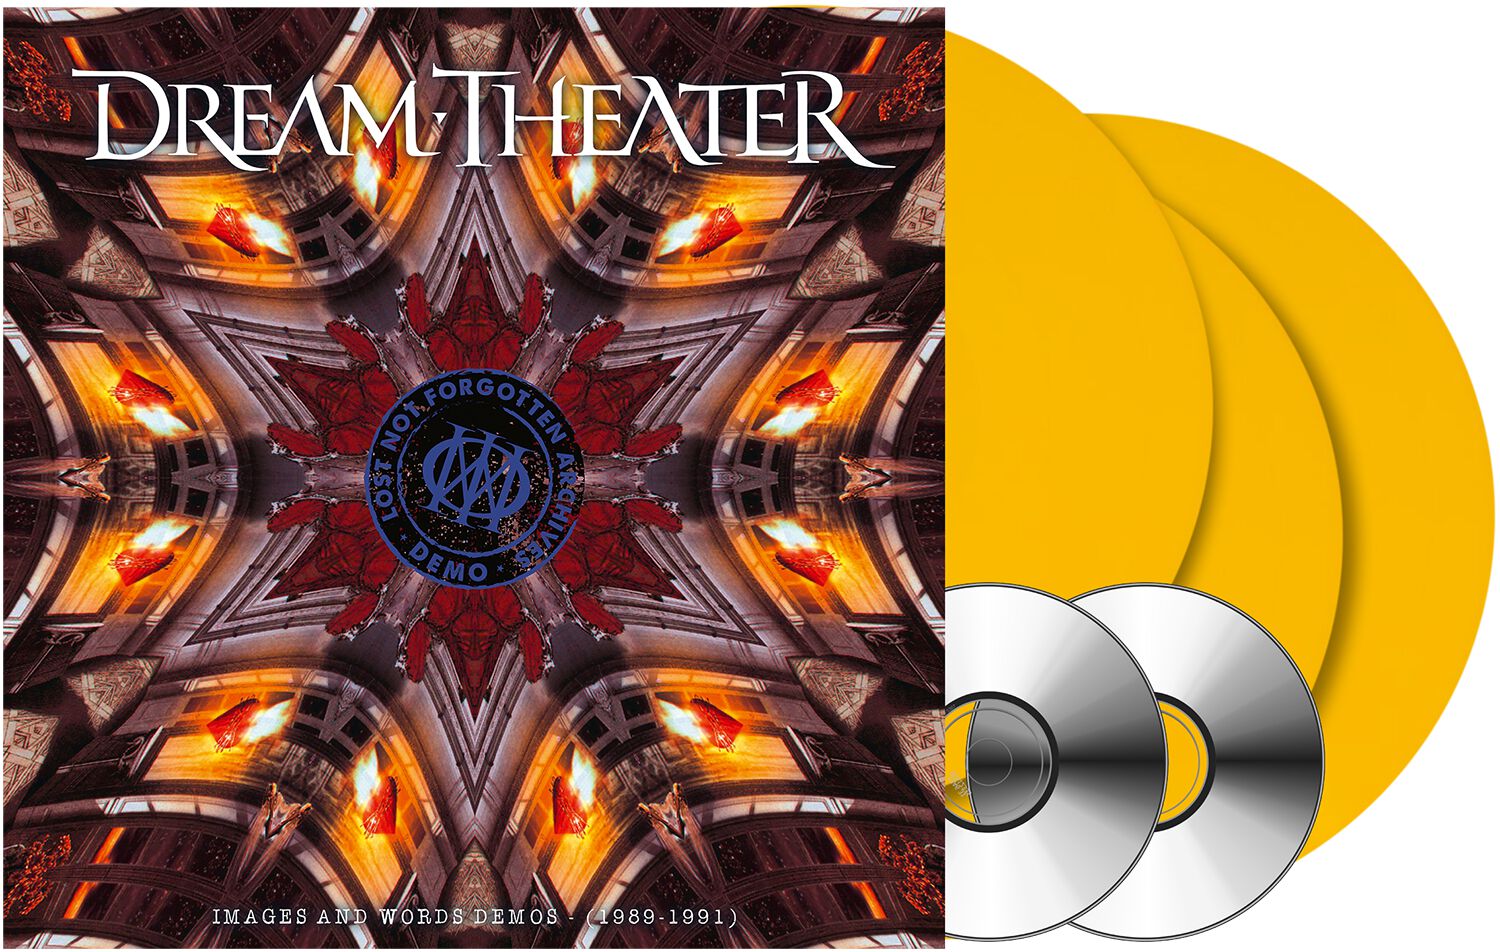 Dream Theater Lost not forgotten archives: Images and Words Demos (1989-1991) LP coloured